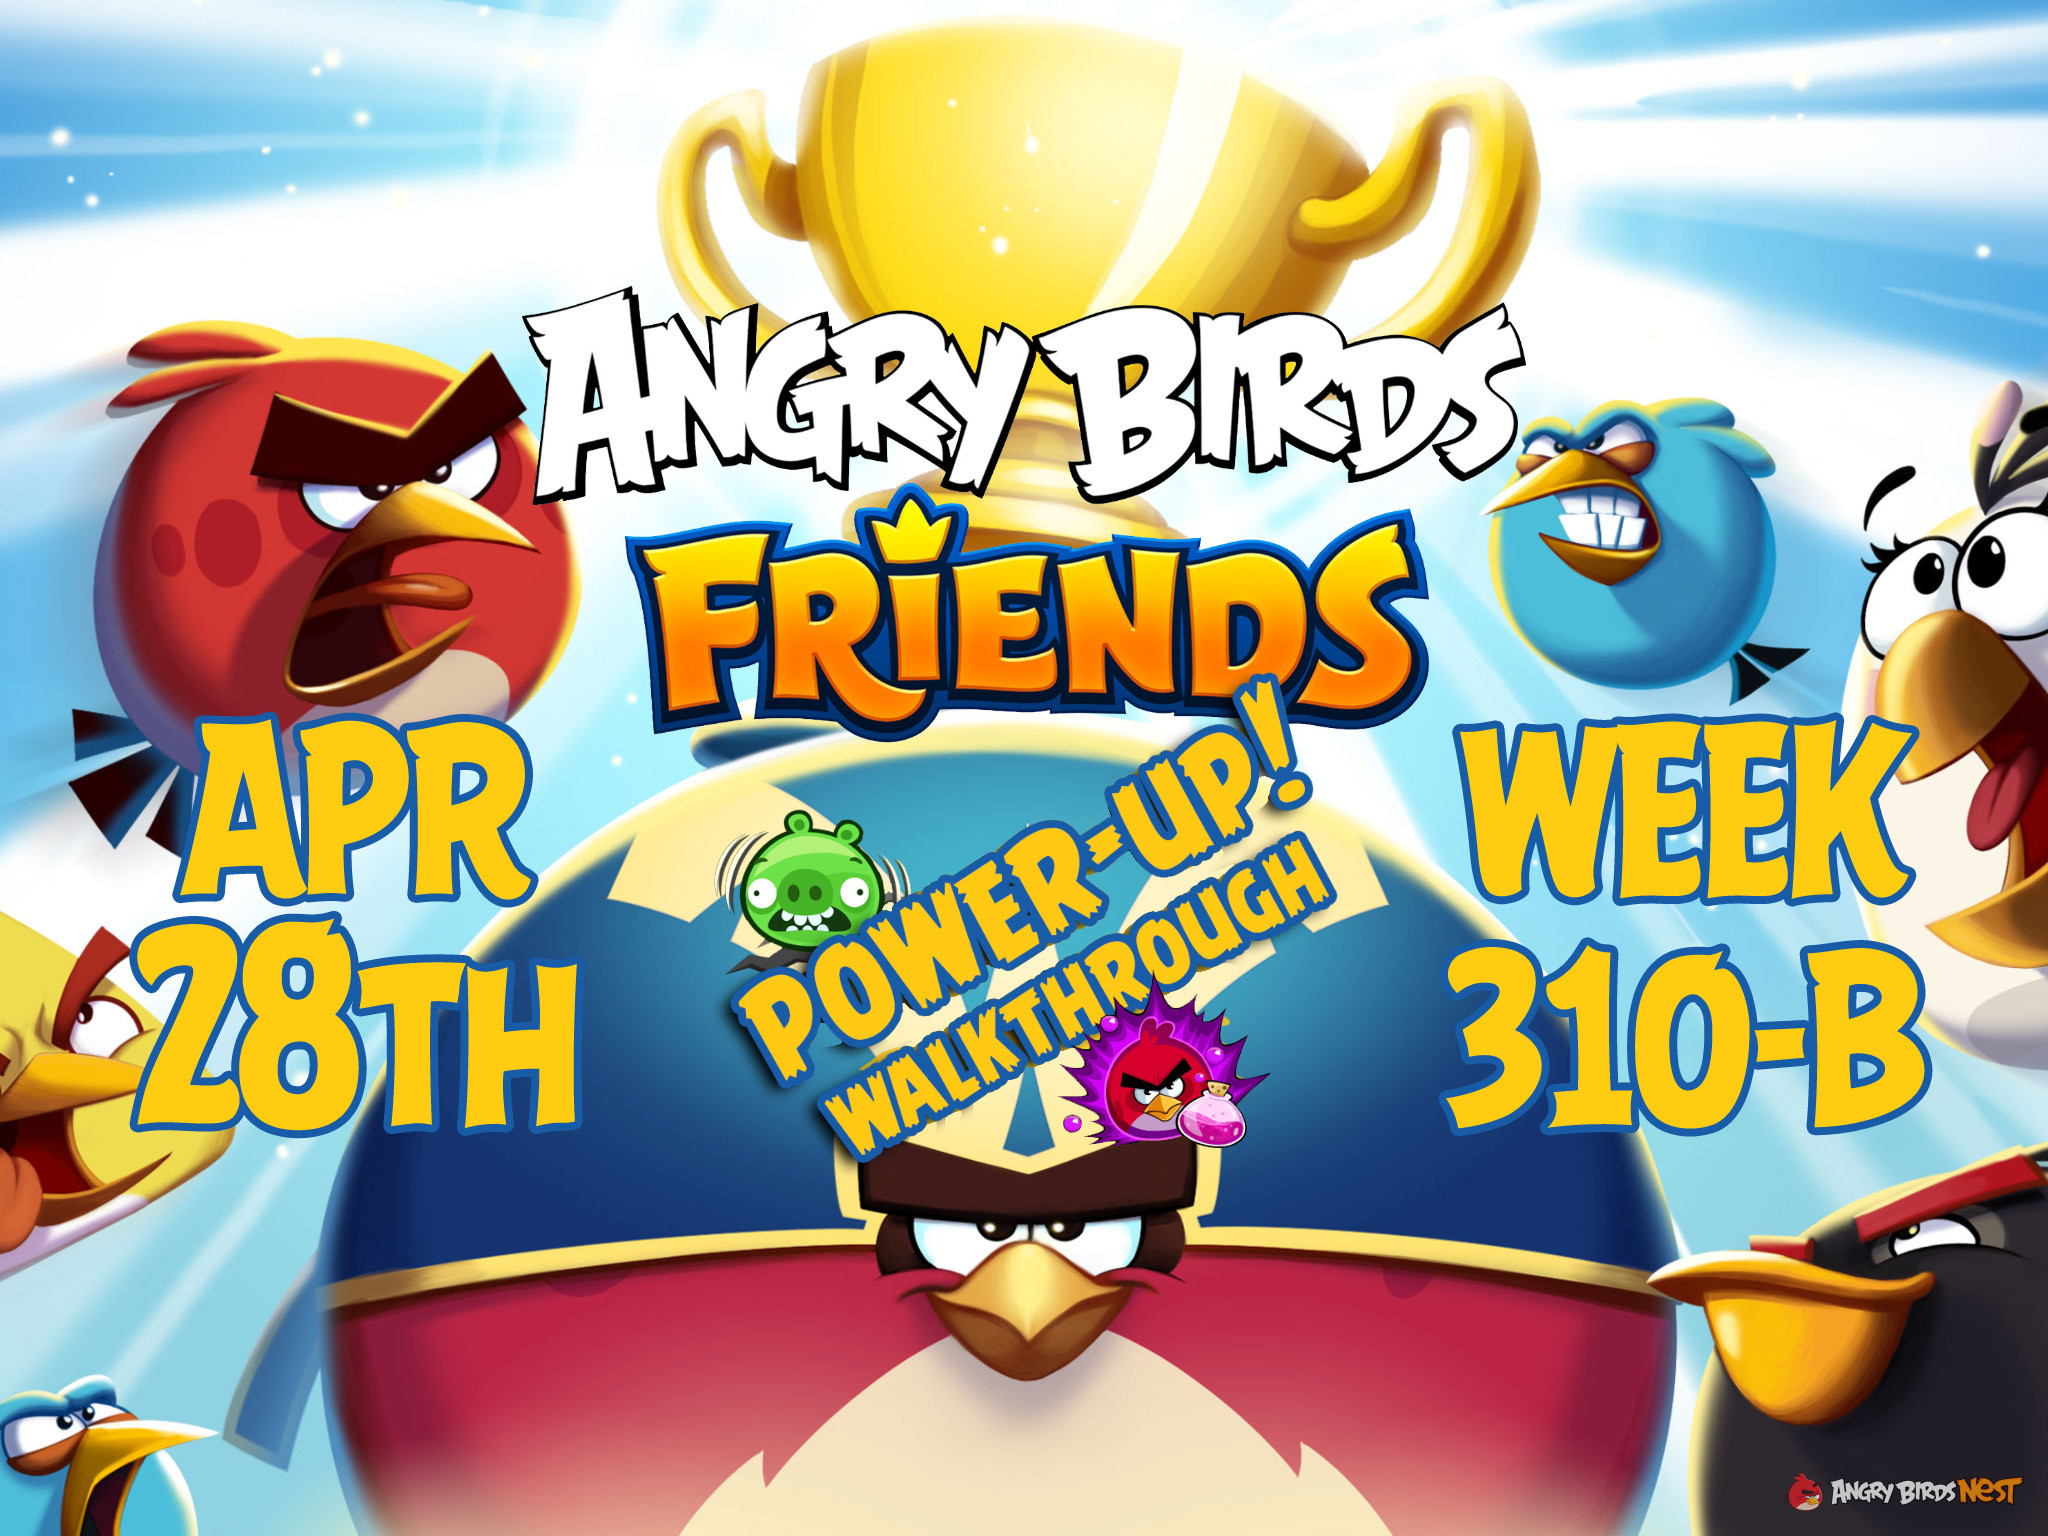 Angry Birds Friends Tournament Week 310-B Feature Image PU